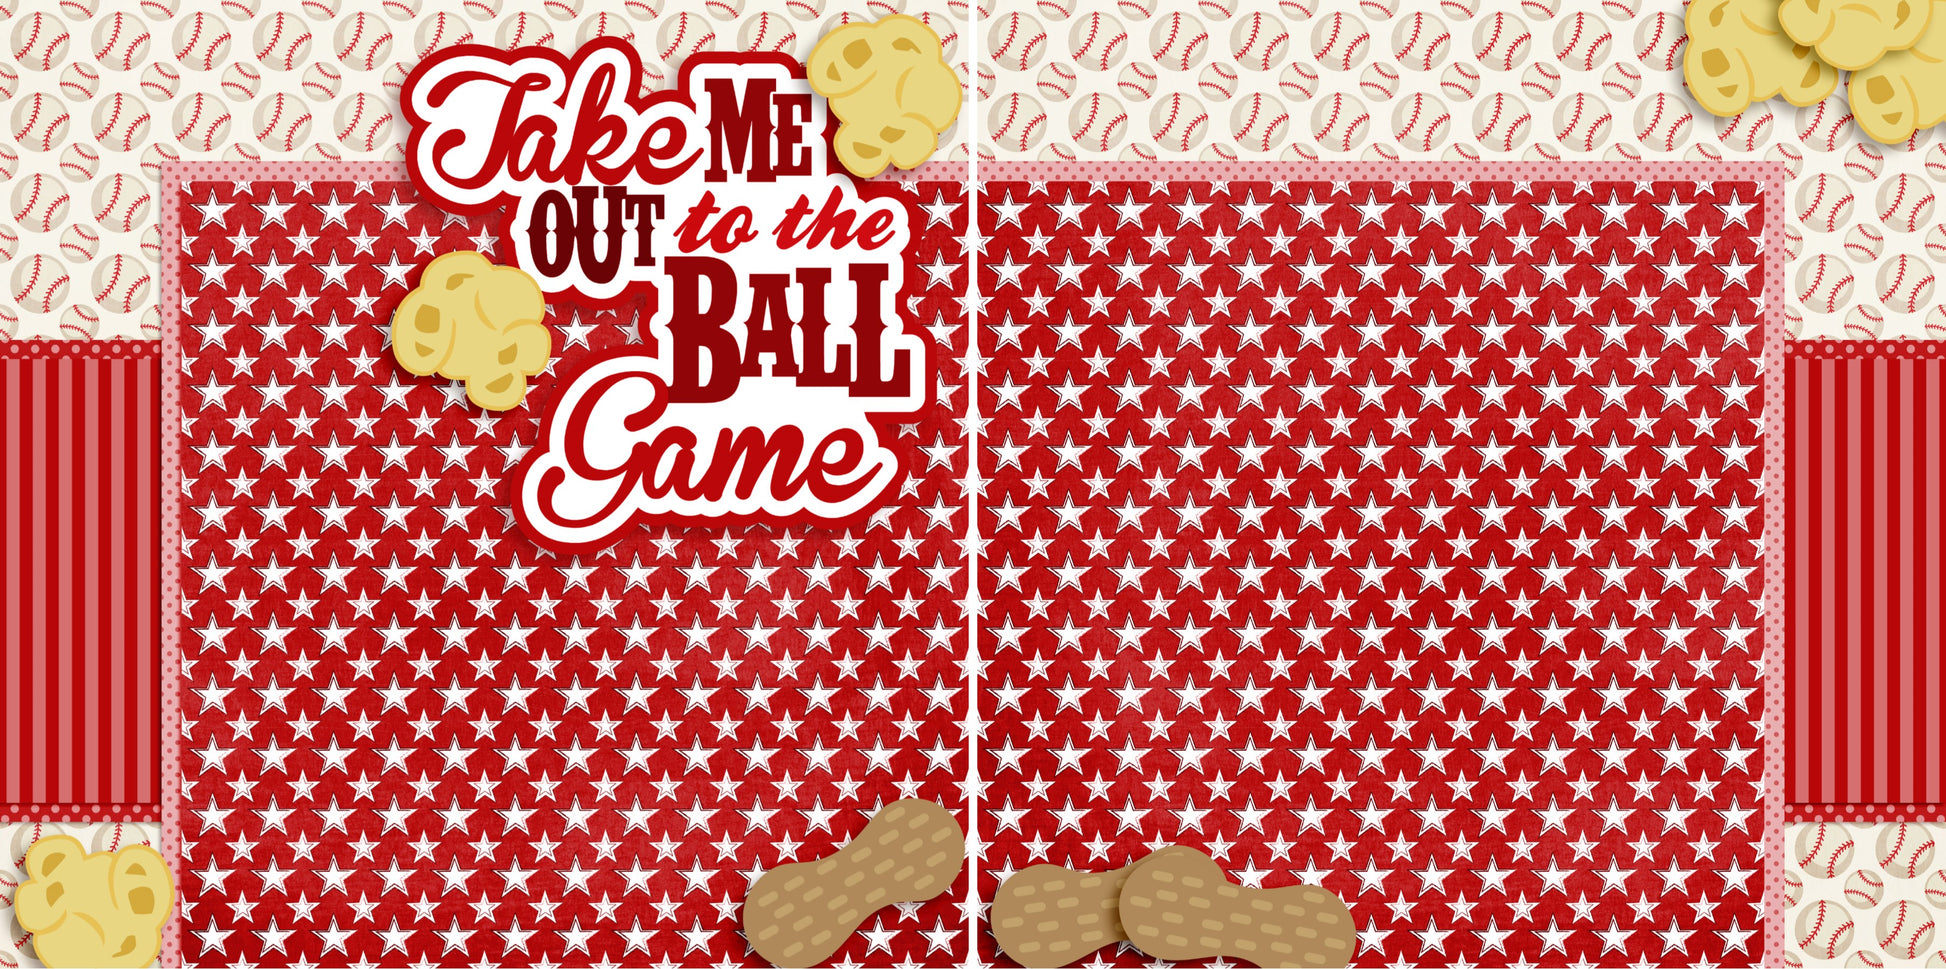 Take Me Out to the Ball Game Red NPM - 3235 - EZscrapbooks Scrapbook Layouts baseball, Sports